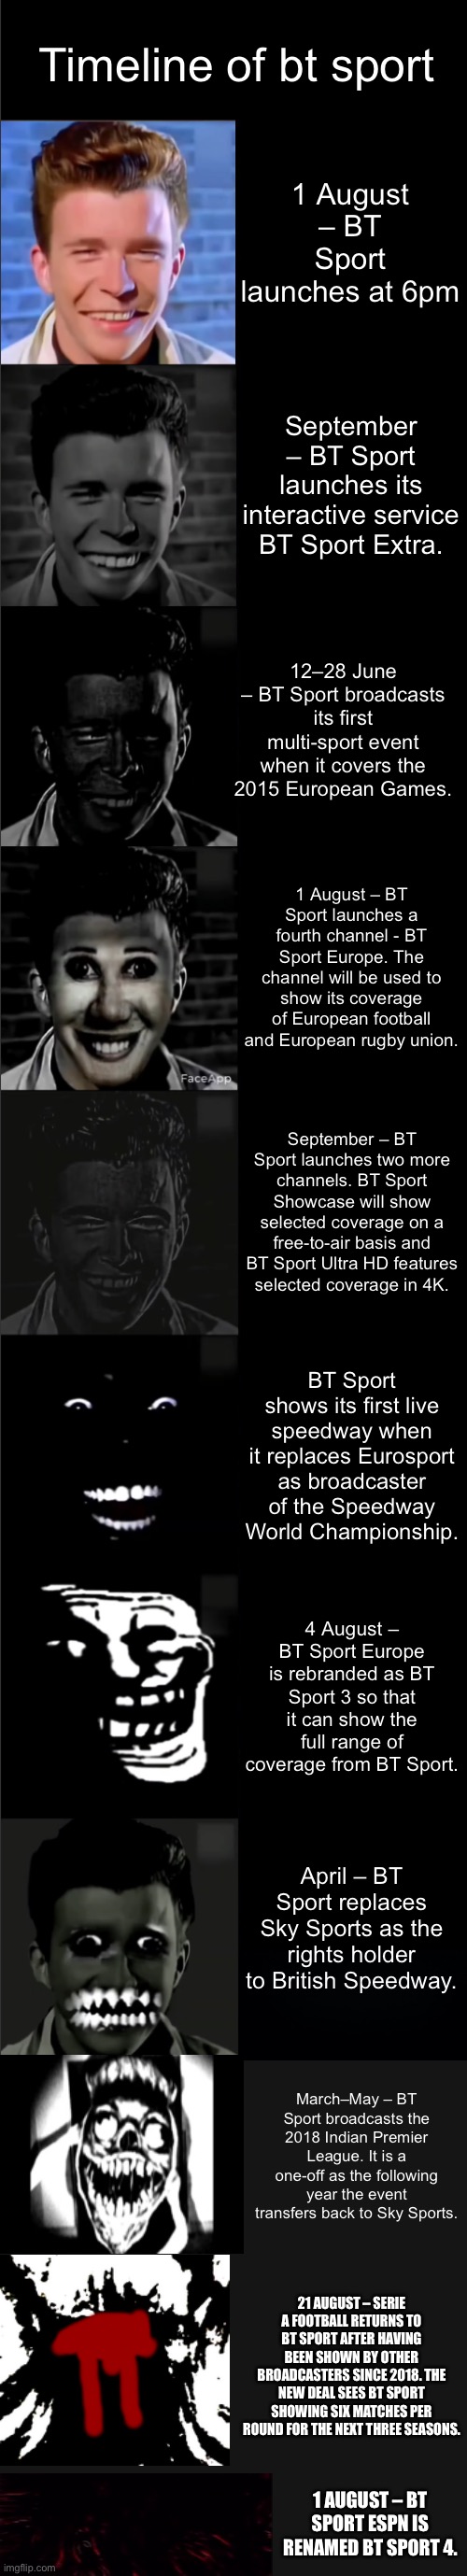 Timeline of bt sport | Timeline of bt sport; 1 August – BT Sport launches at 6pm; September – BT Sport launches its interactive service BT Sport Extra. 12–28 June – BT Sport broadcasts its first multi-sport event when it covers the 2015 European Games. 1 August – BT Sport launches a fourth channel - BT Sport Europe. The channel will be used to show its coverage of European football and European rugby union. September – BT Sport launches two more channels. BT Sport Showcase will show selected coverage on a free-to-air basis and BT Sport Ultra HD features selected coverage in 4K. BT Sport shows its first live speedway when it replaces Eurosport as broadcaster of the Speedway World Championship. 4 August – BT Sport Europe is rebranded as BT Sport 3 so that it can show the full range of coverage from BT Sport. April – BT Sport replaces Sky Sports as the rights holder to British Speedway. March–May – BT Sport broadcasts the 2018 Indian Premier League. It is a one-off as the following year the event transfers back to Sky Sports. 21 AUGUST – SERIE A FOOTBALL RETURNS TO BT SPORT AFTER HAVING BEEN SHOWN BY OTHER BROADCASTERS SINCE 2018. THE NEW DEAL SEES BT SPORT SHOWING SIX MATCHES PER ROUND FOR THE NEXT THREE SEASONS. 1 AUGUST – BT SPORT ESPN IS RENAMED BT SPORT 4. | image tagged in rick astley becoming demonic,bt sport | made w/ Imgflip meme maker